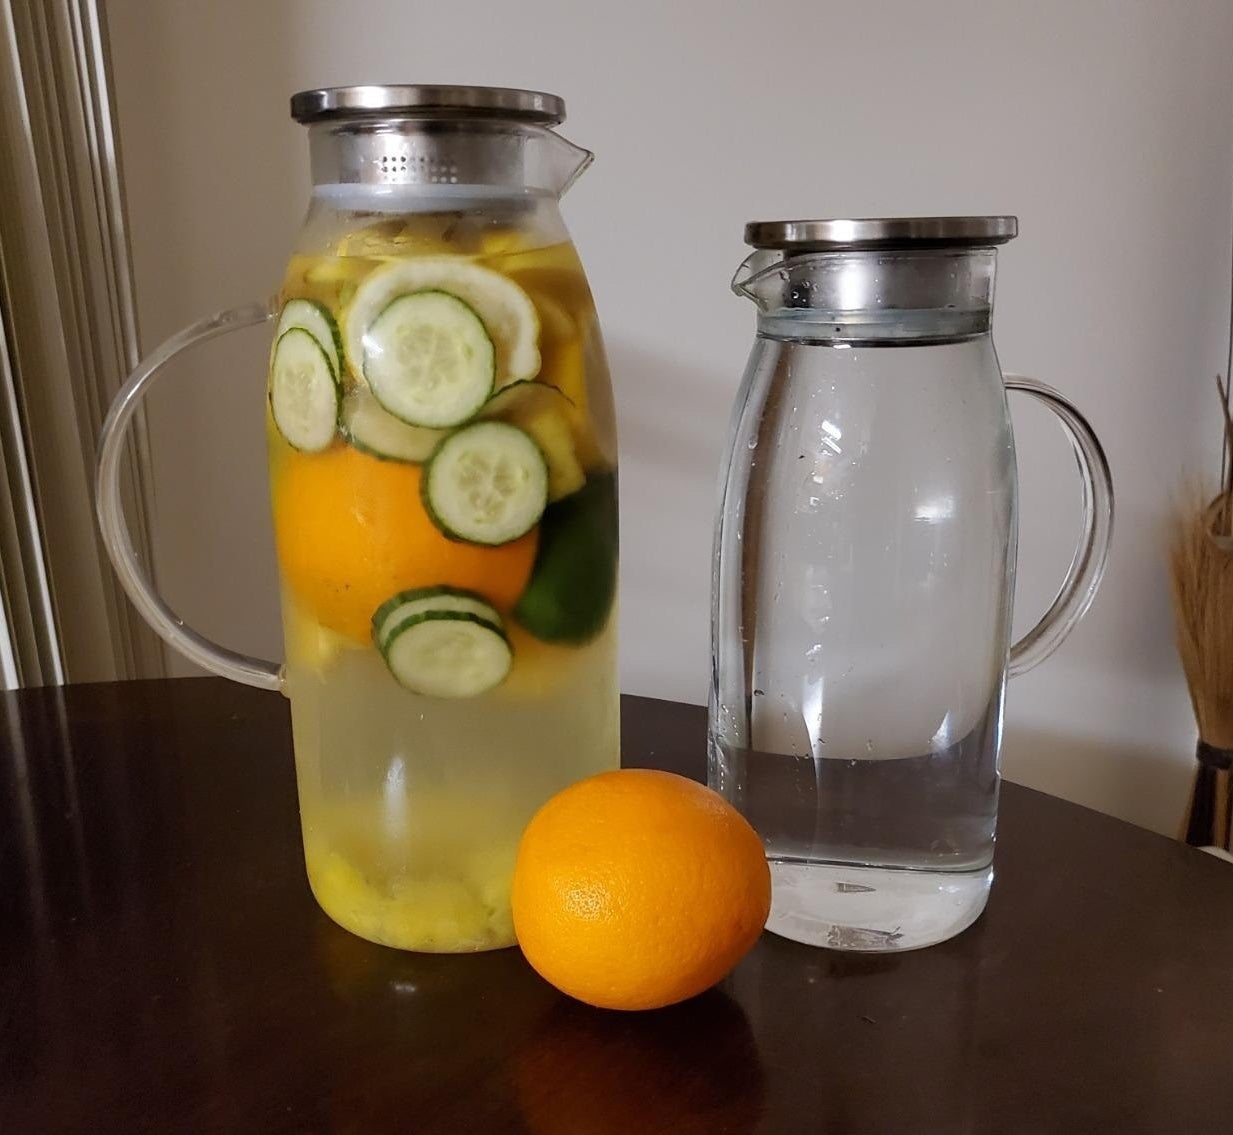 Reviewer has two differently sized glass pitchers filled with water